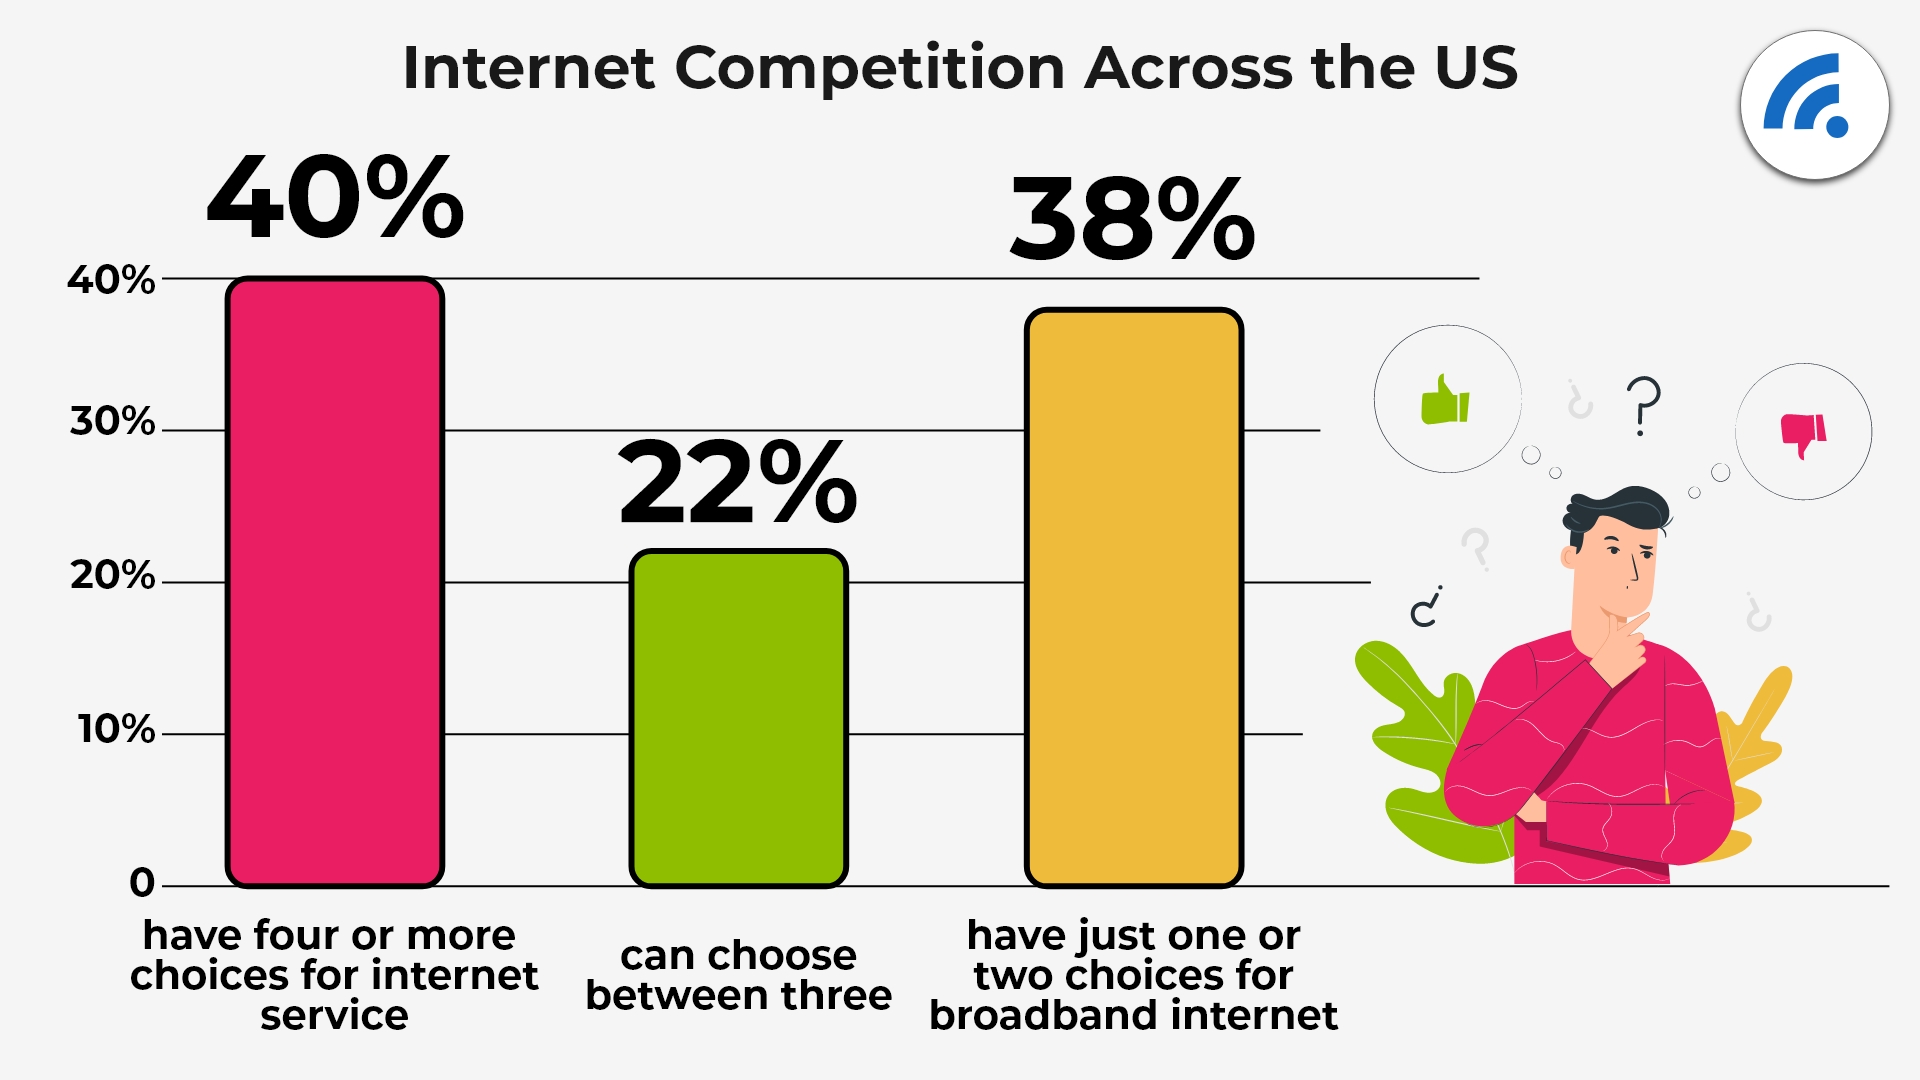 A Snapshot Of Internet Service Provider Competition in the U.S.